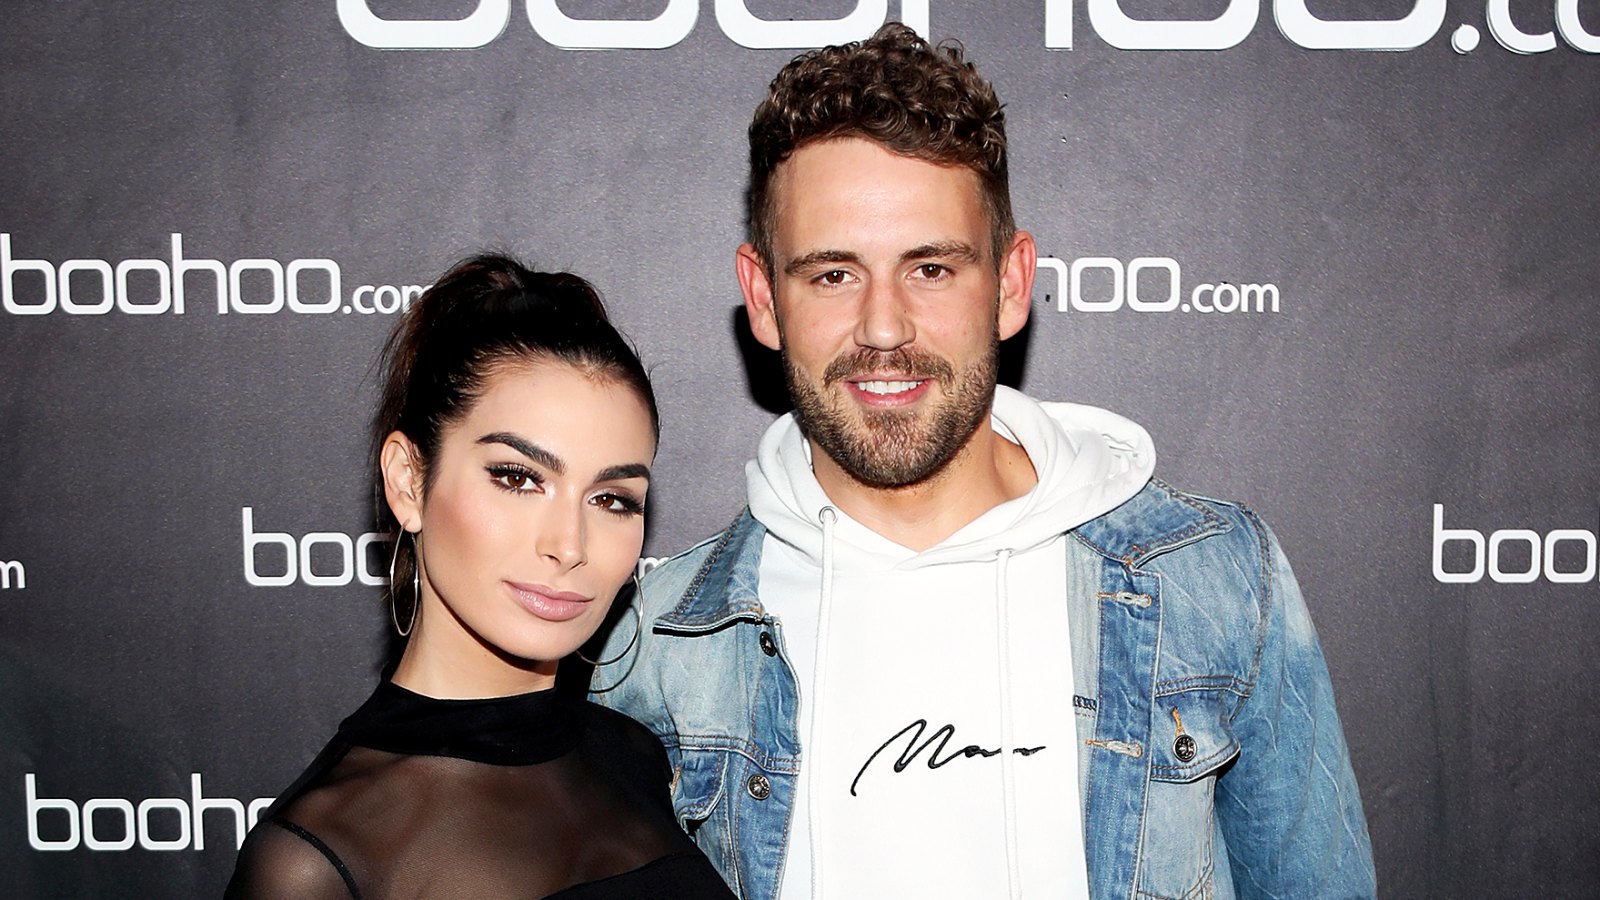 Ashley Iaconetti and Nick Viall attend the launch of the boohoo.com spring collection and the Zendaya Edit at The Highlight Room at the Dream Hollywood on March 21, 2018 in Hollywood, California.